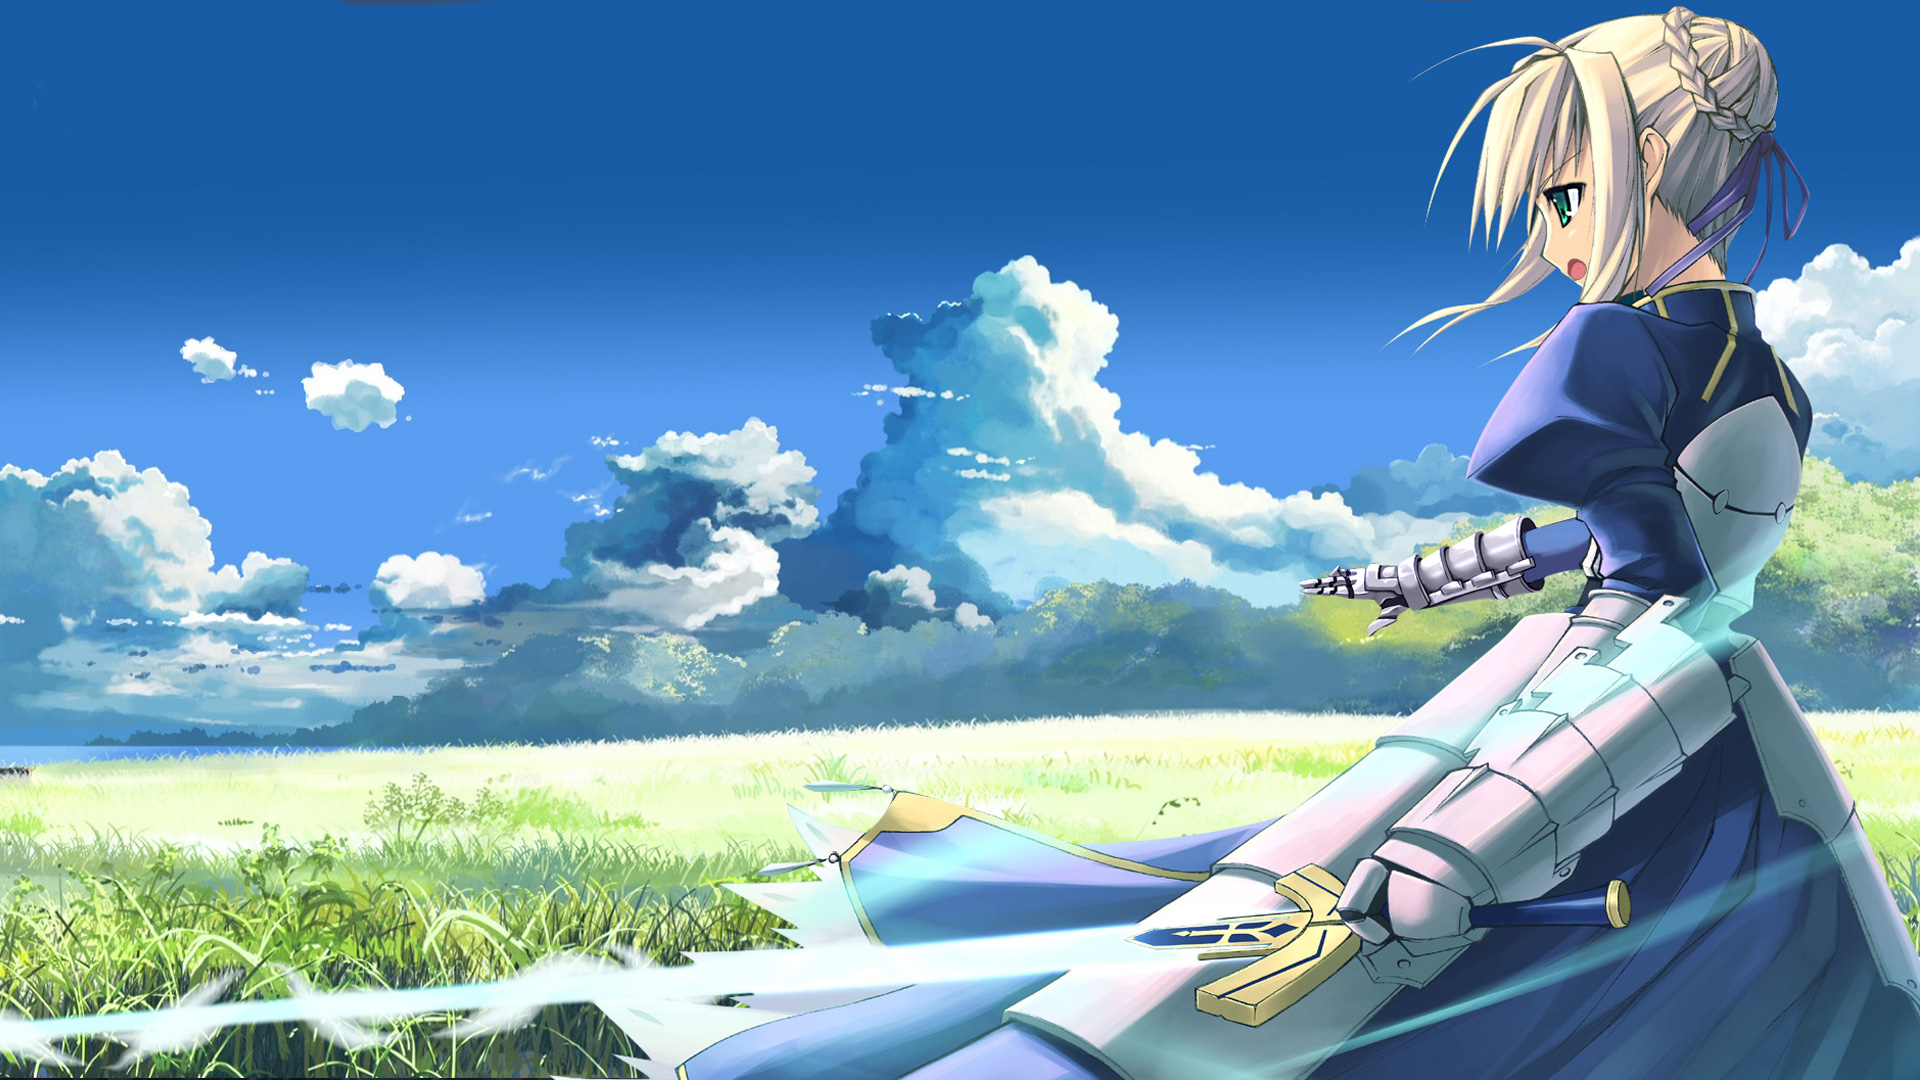 Anime Girl 1080p Wallpapers - Wallpaper Cave